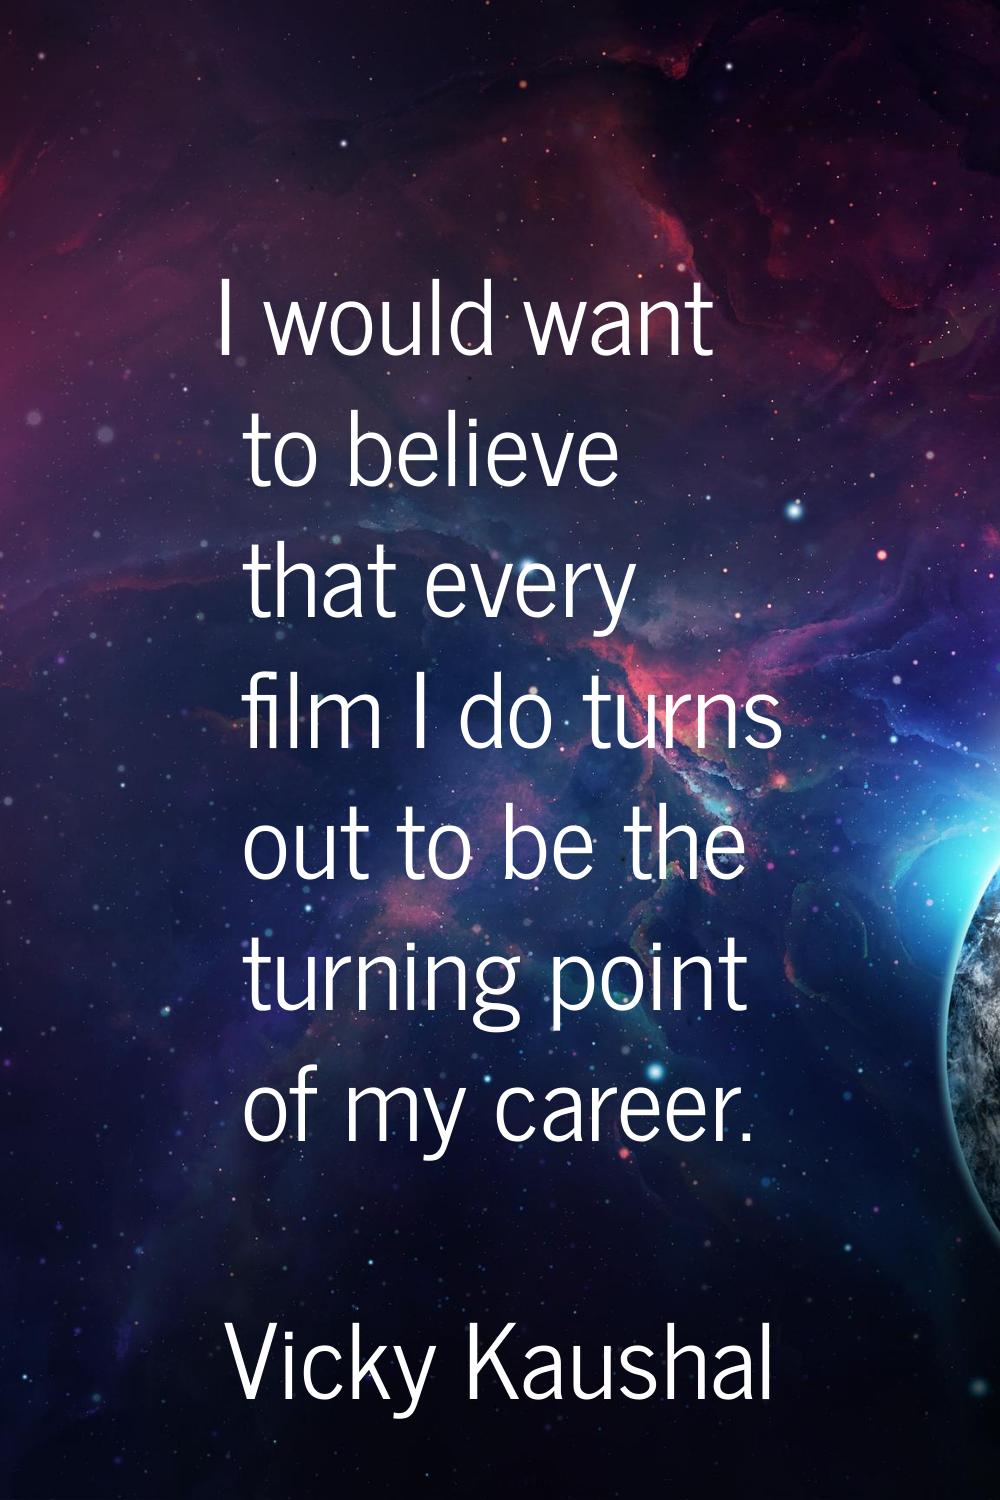 I would want to believe that every film I do turns out to be the turning point of my career.